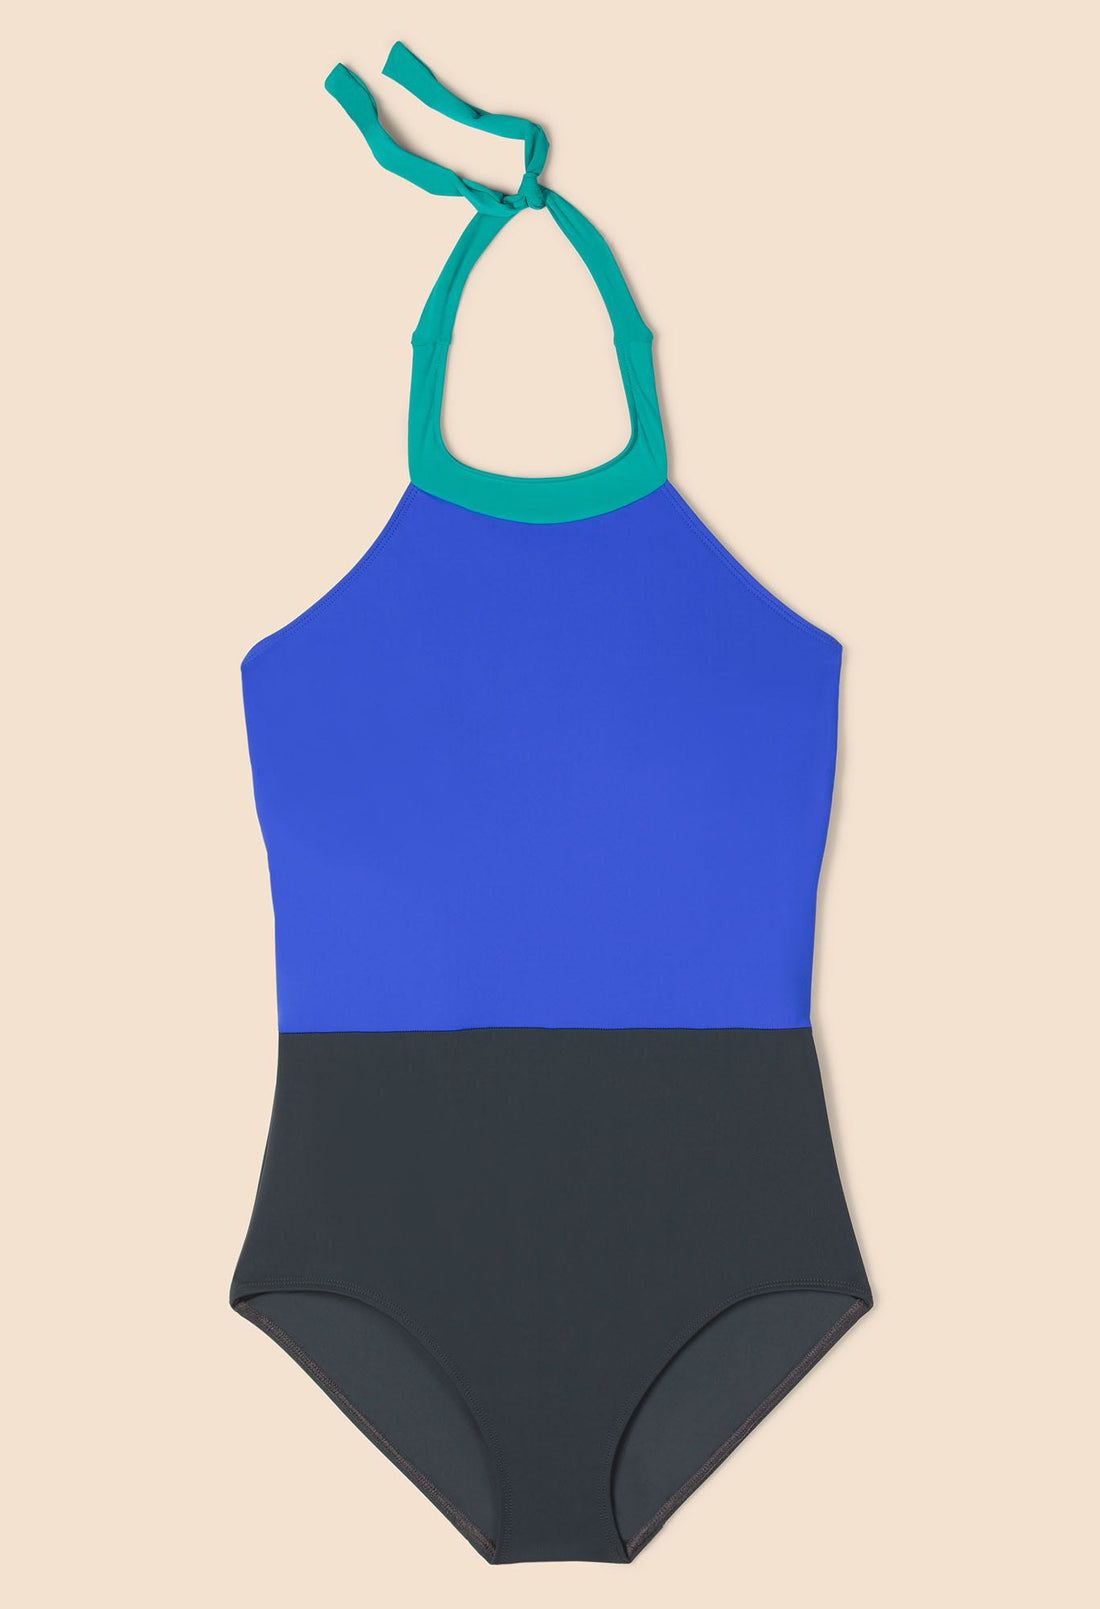 Oprah Magazine Online - 15 Best Bathing Suits for Every Beach Body